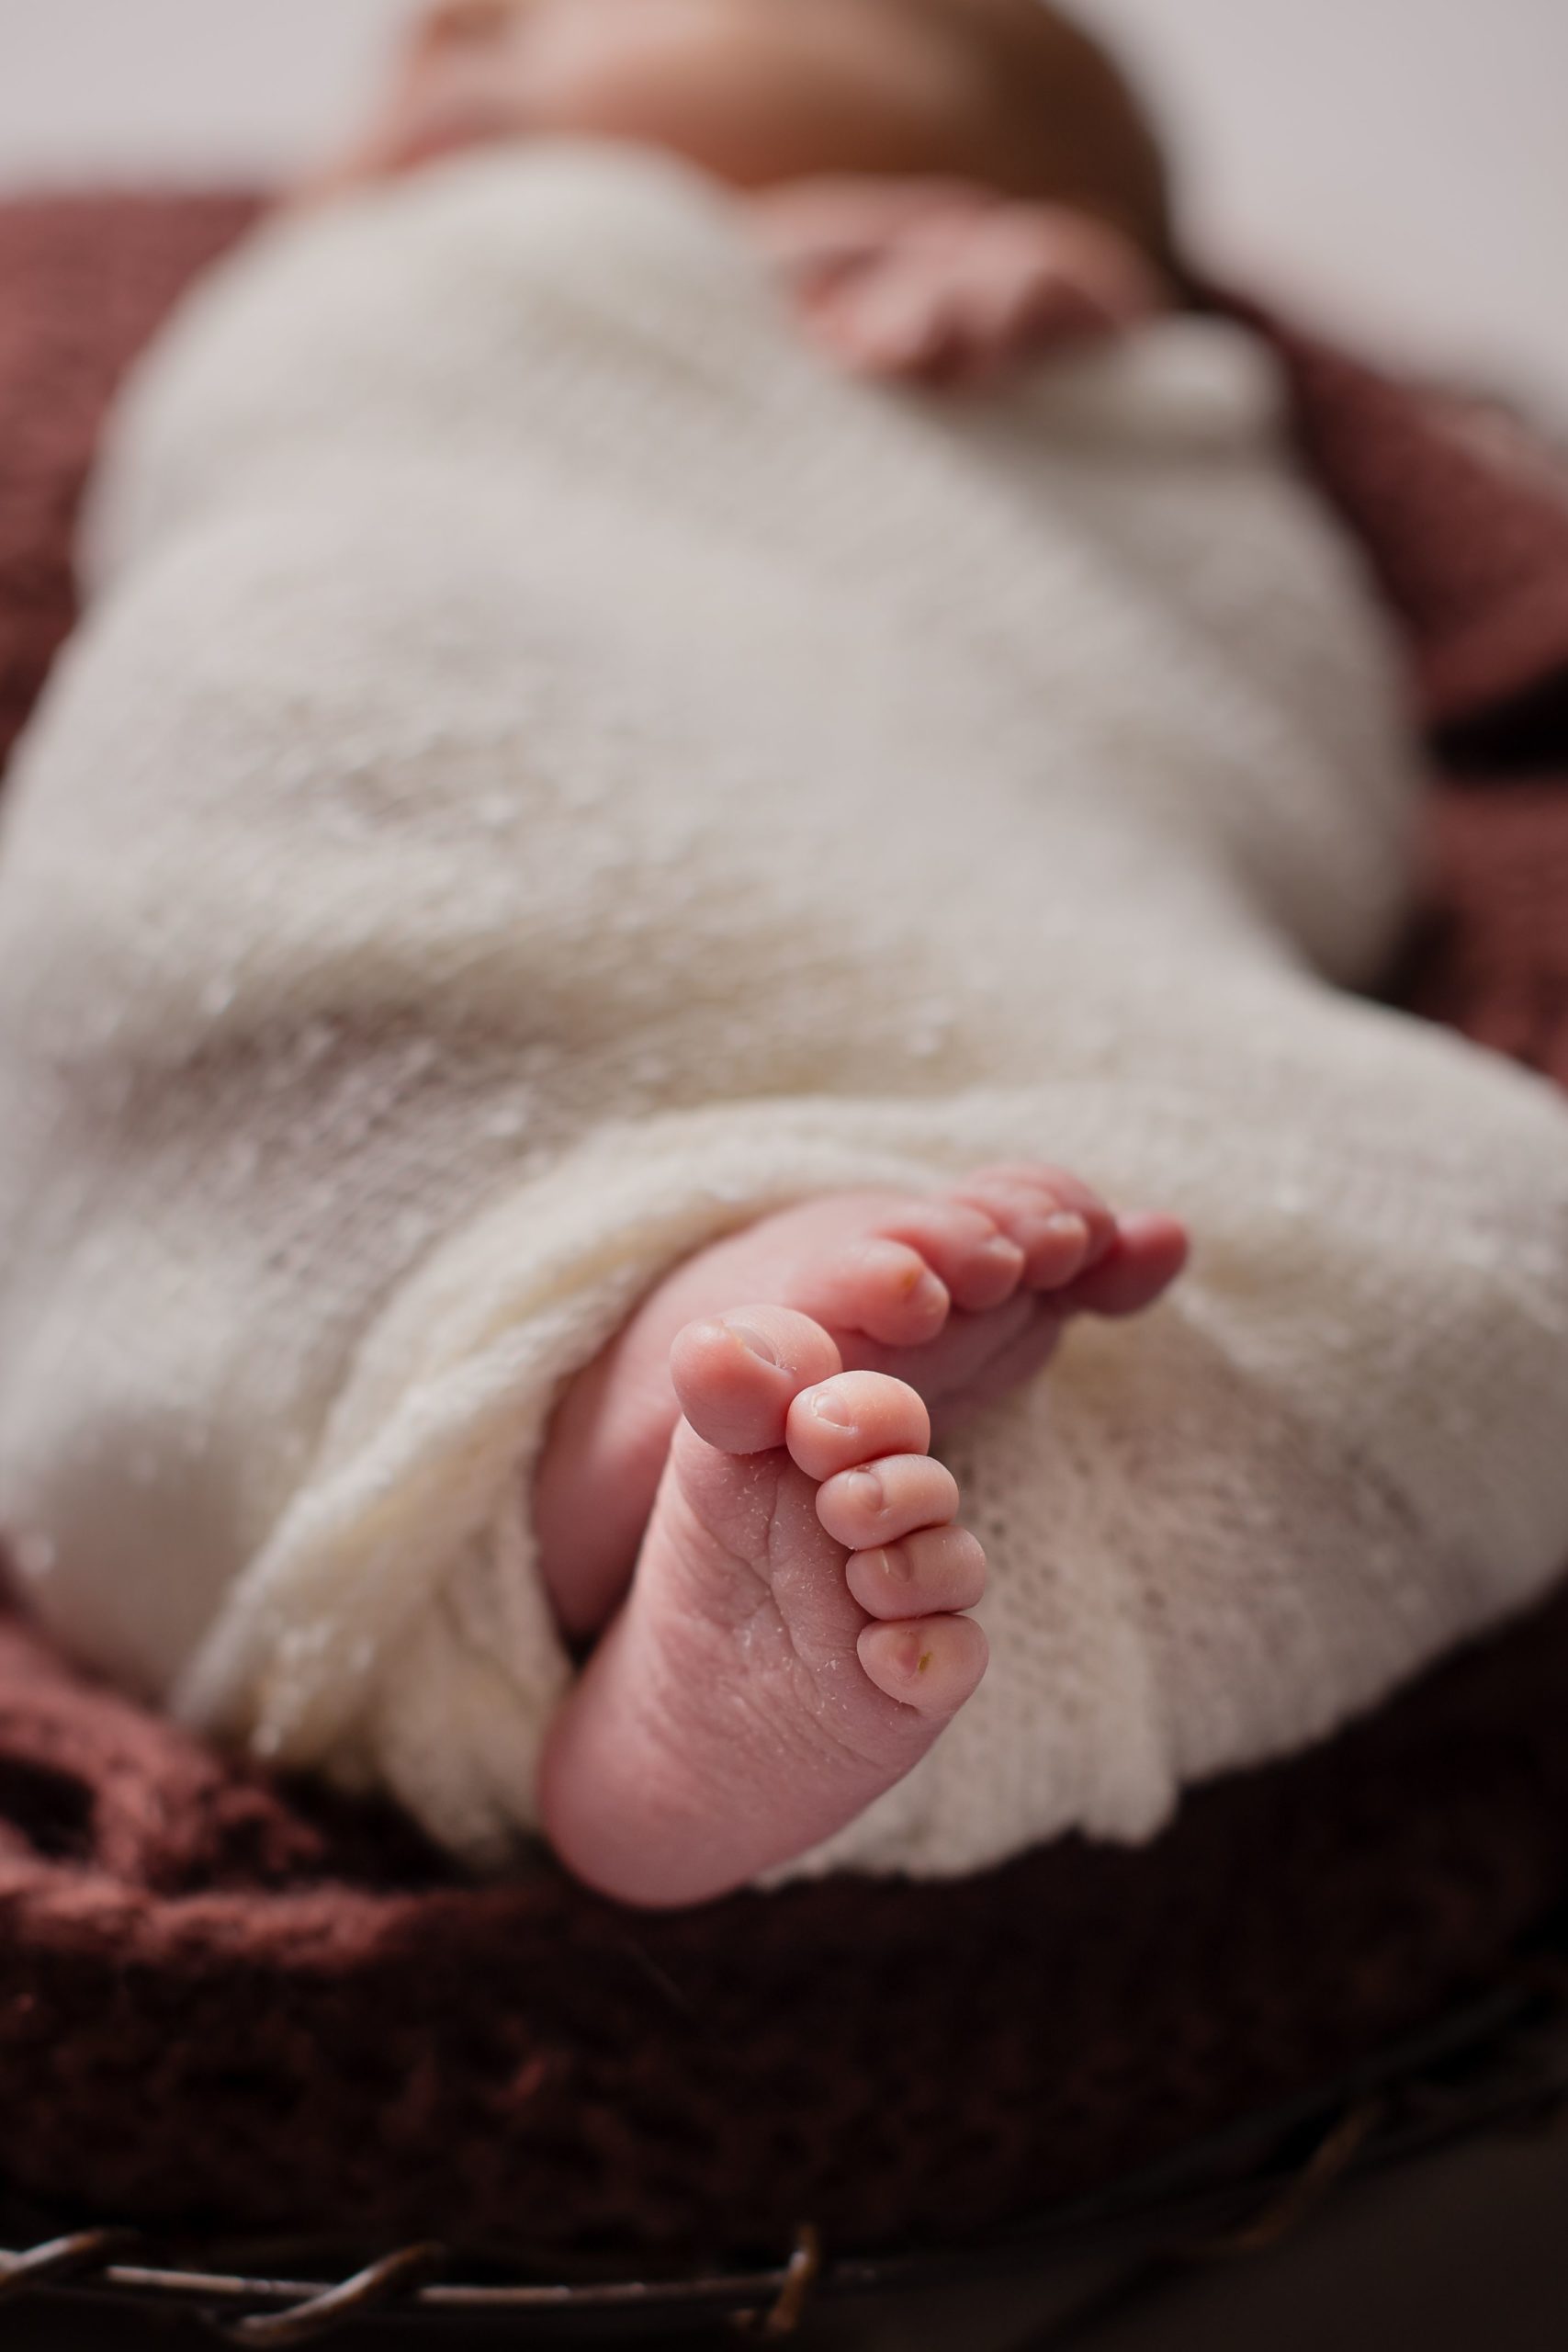 A newborn baby swaddled on a cozy blanket and sleeping soundly as the photographer captures its adorable little toes.